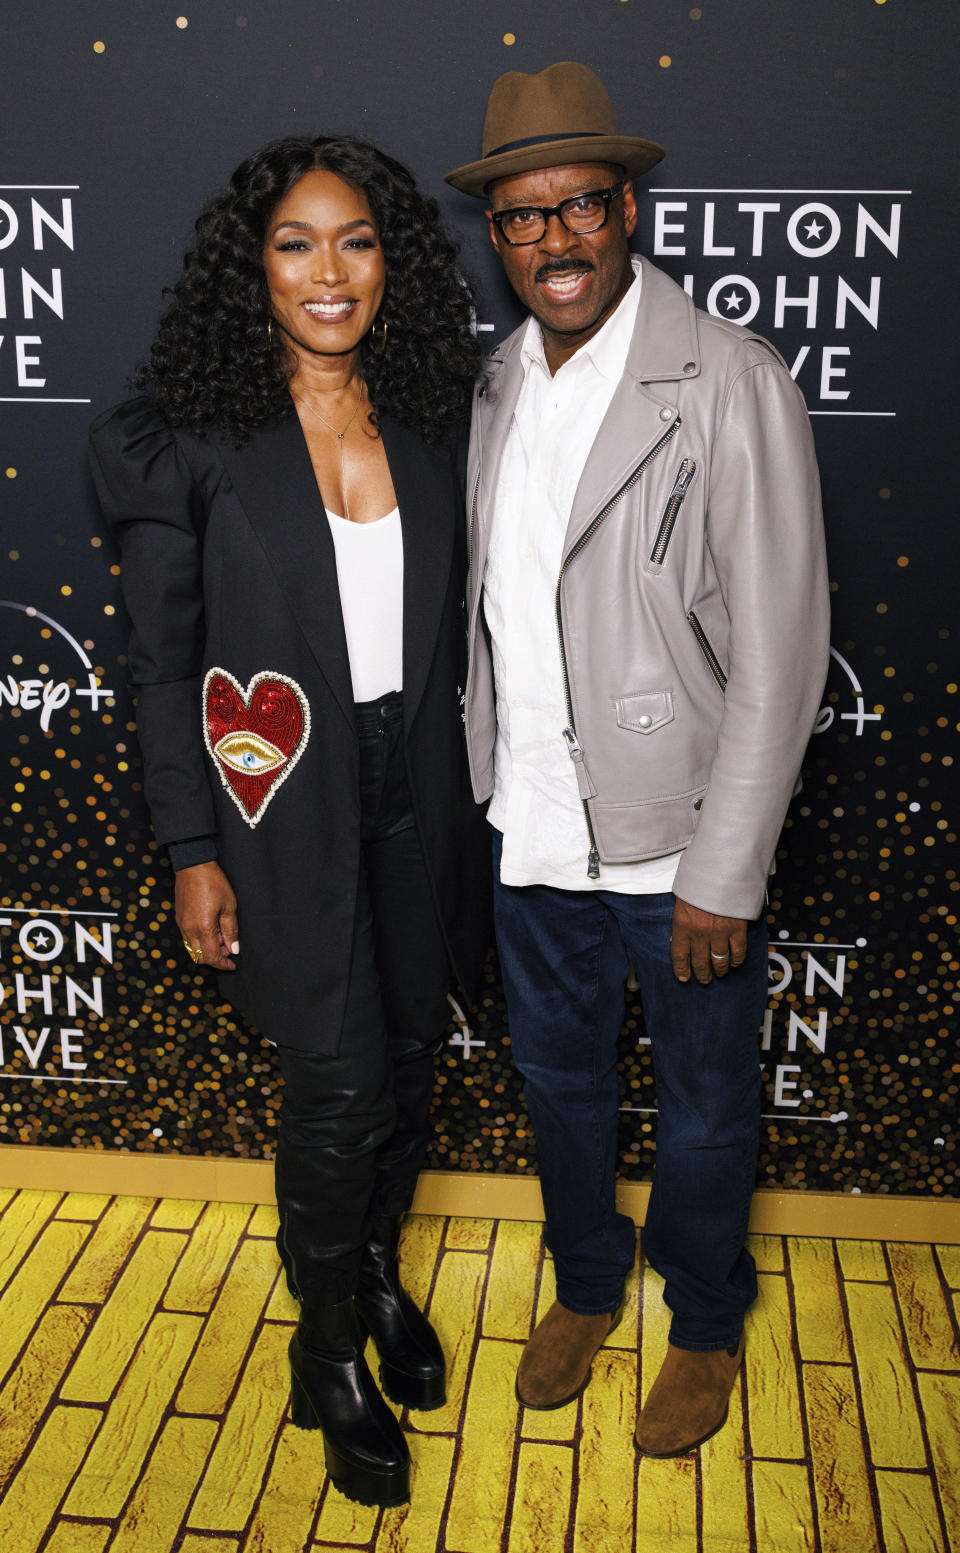 Angela Bassett, left and Courtney B. Vance arrive at Elton John's final North American show of his "Farewell Yellow Brick Road" tour on Sunday, Nov. 20, 2022, at the Dodger Stadium in Los Angeles. (Photo by Willy Sanjuan/Invision/AP)